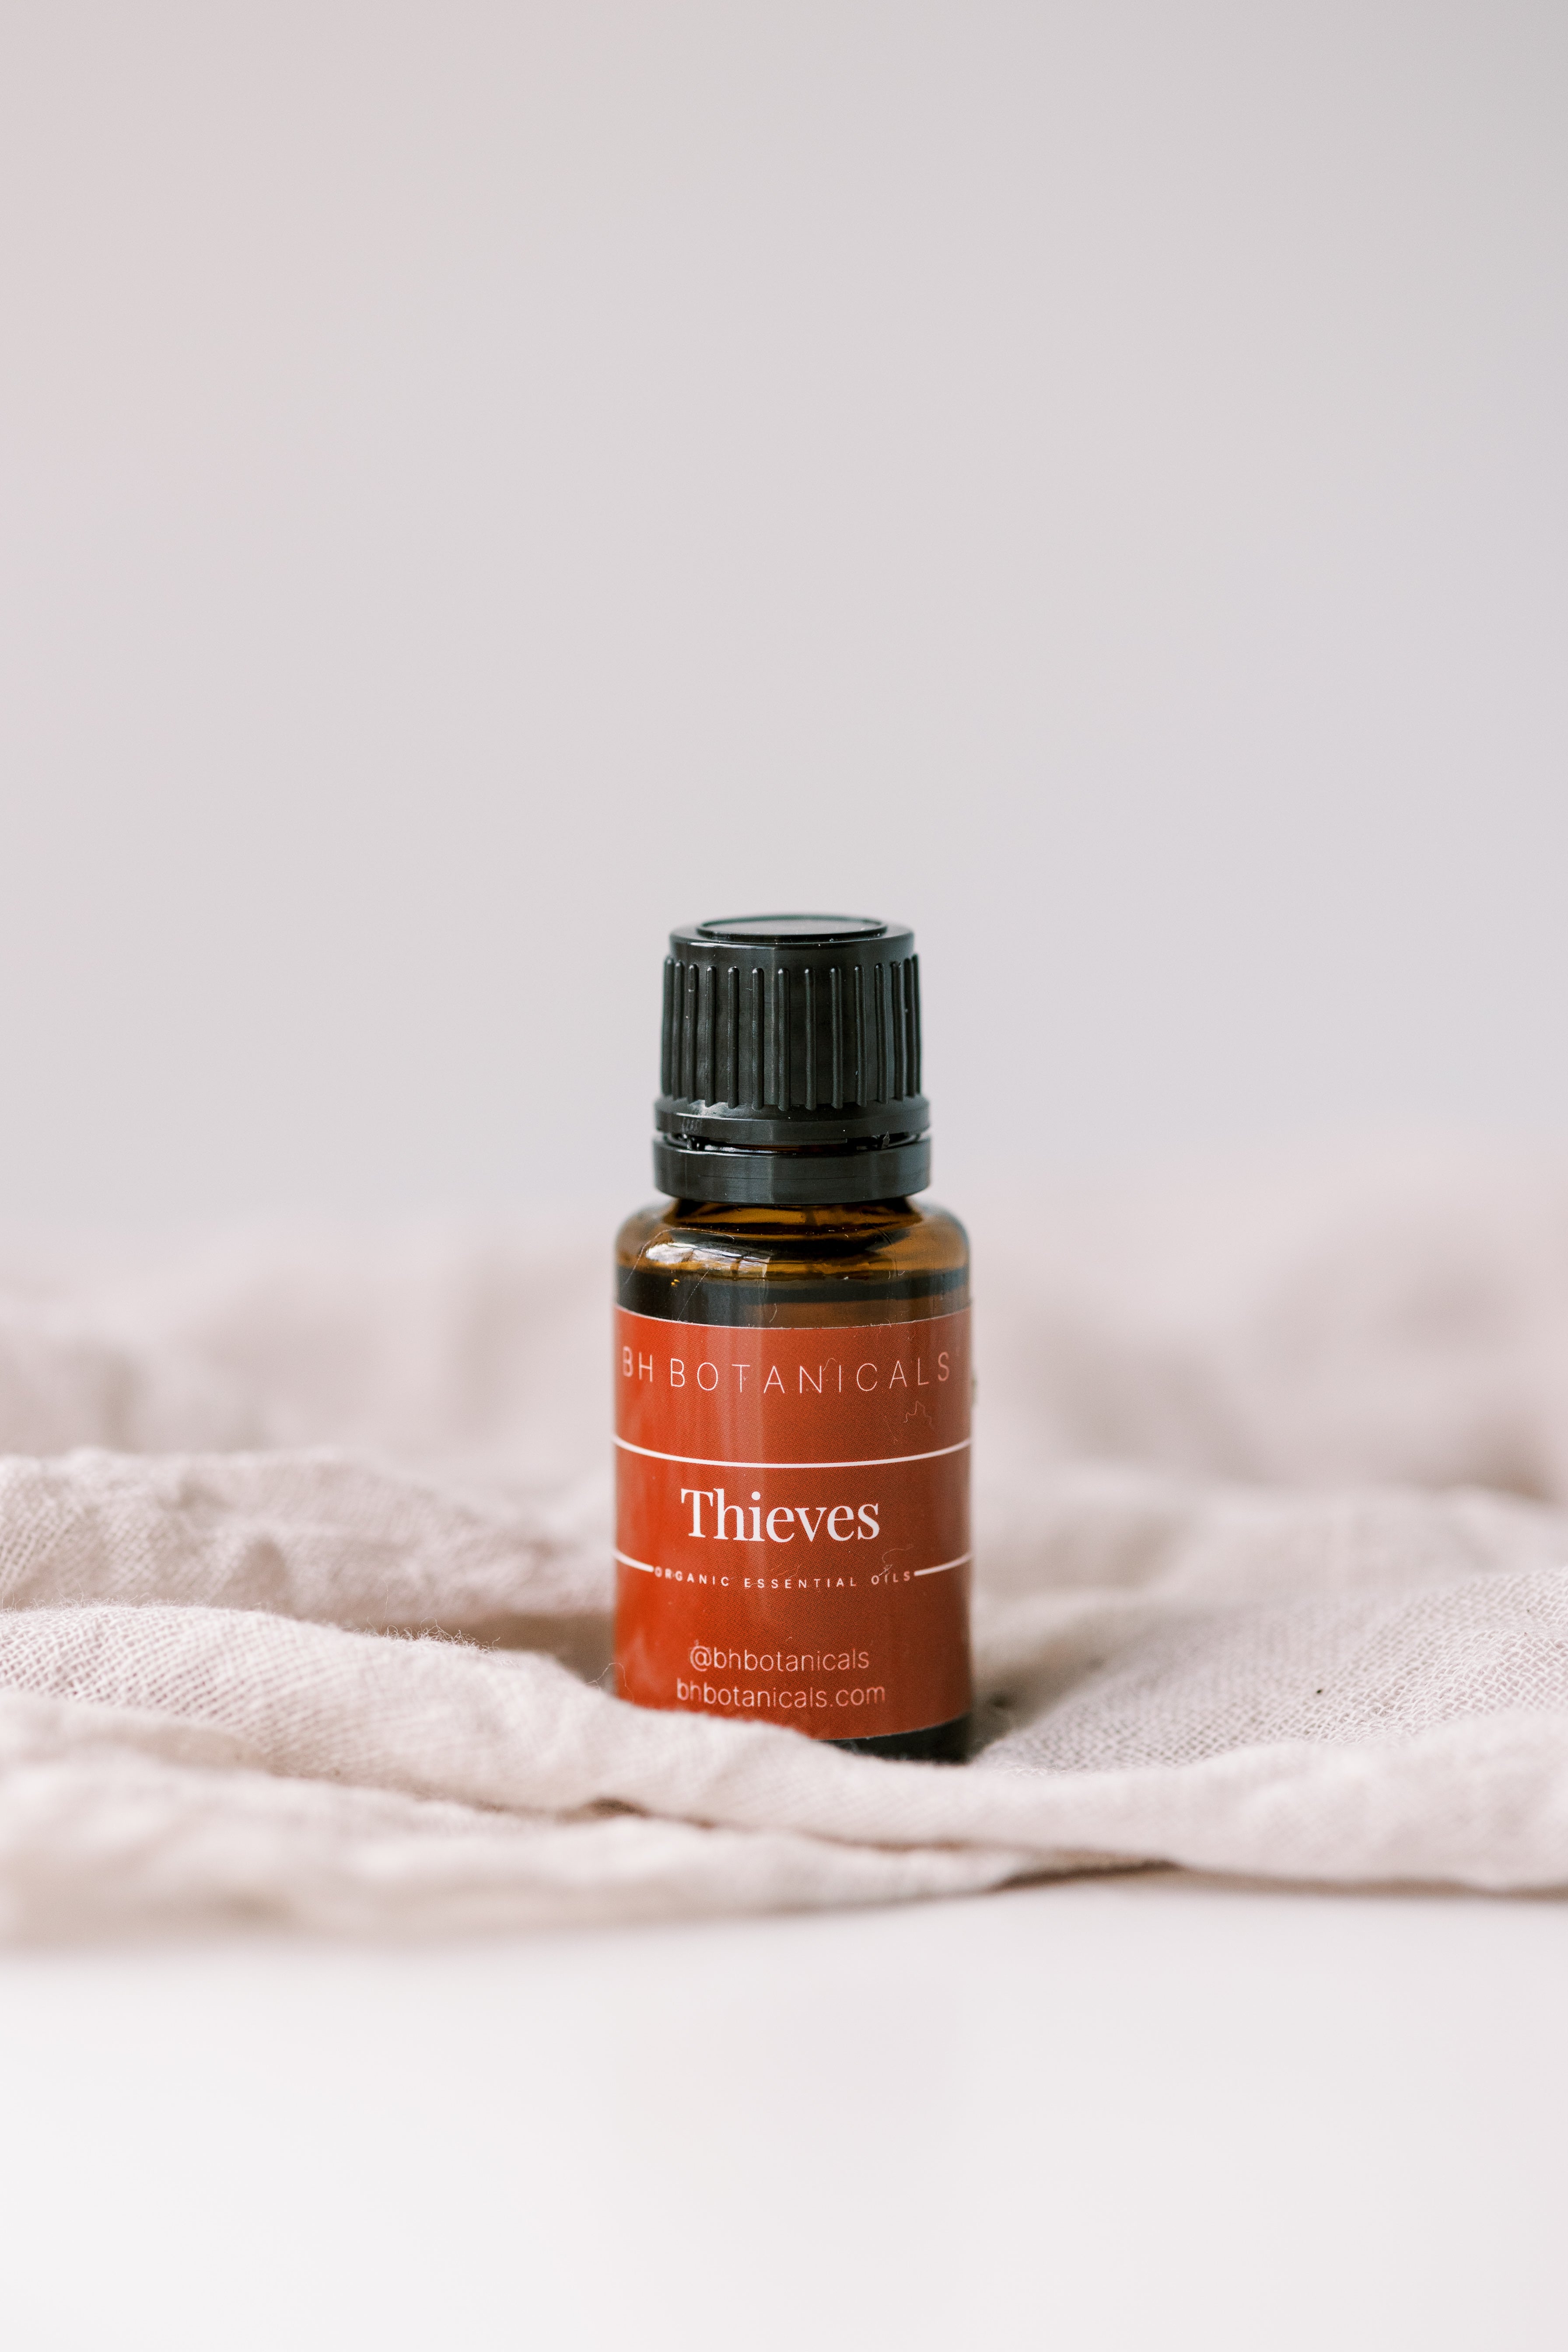 Thieves Oil  Compare to Thieves Essential Oil